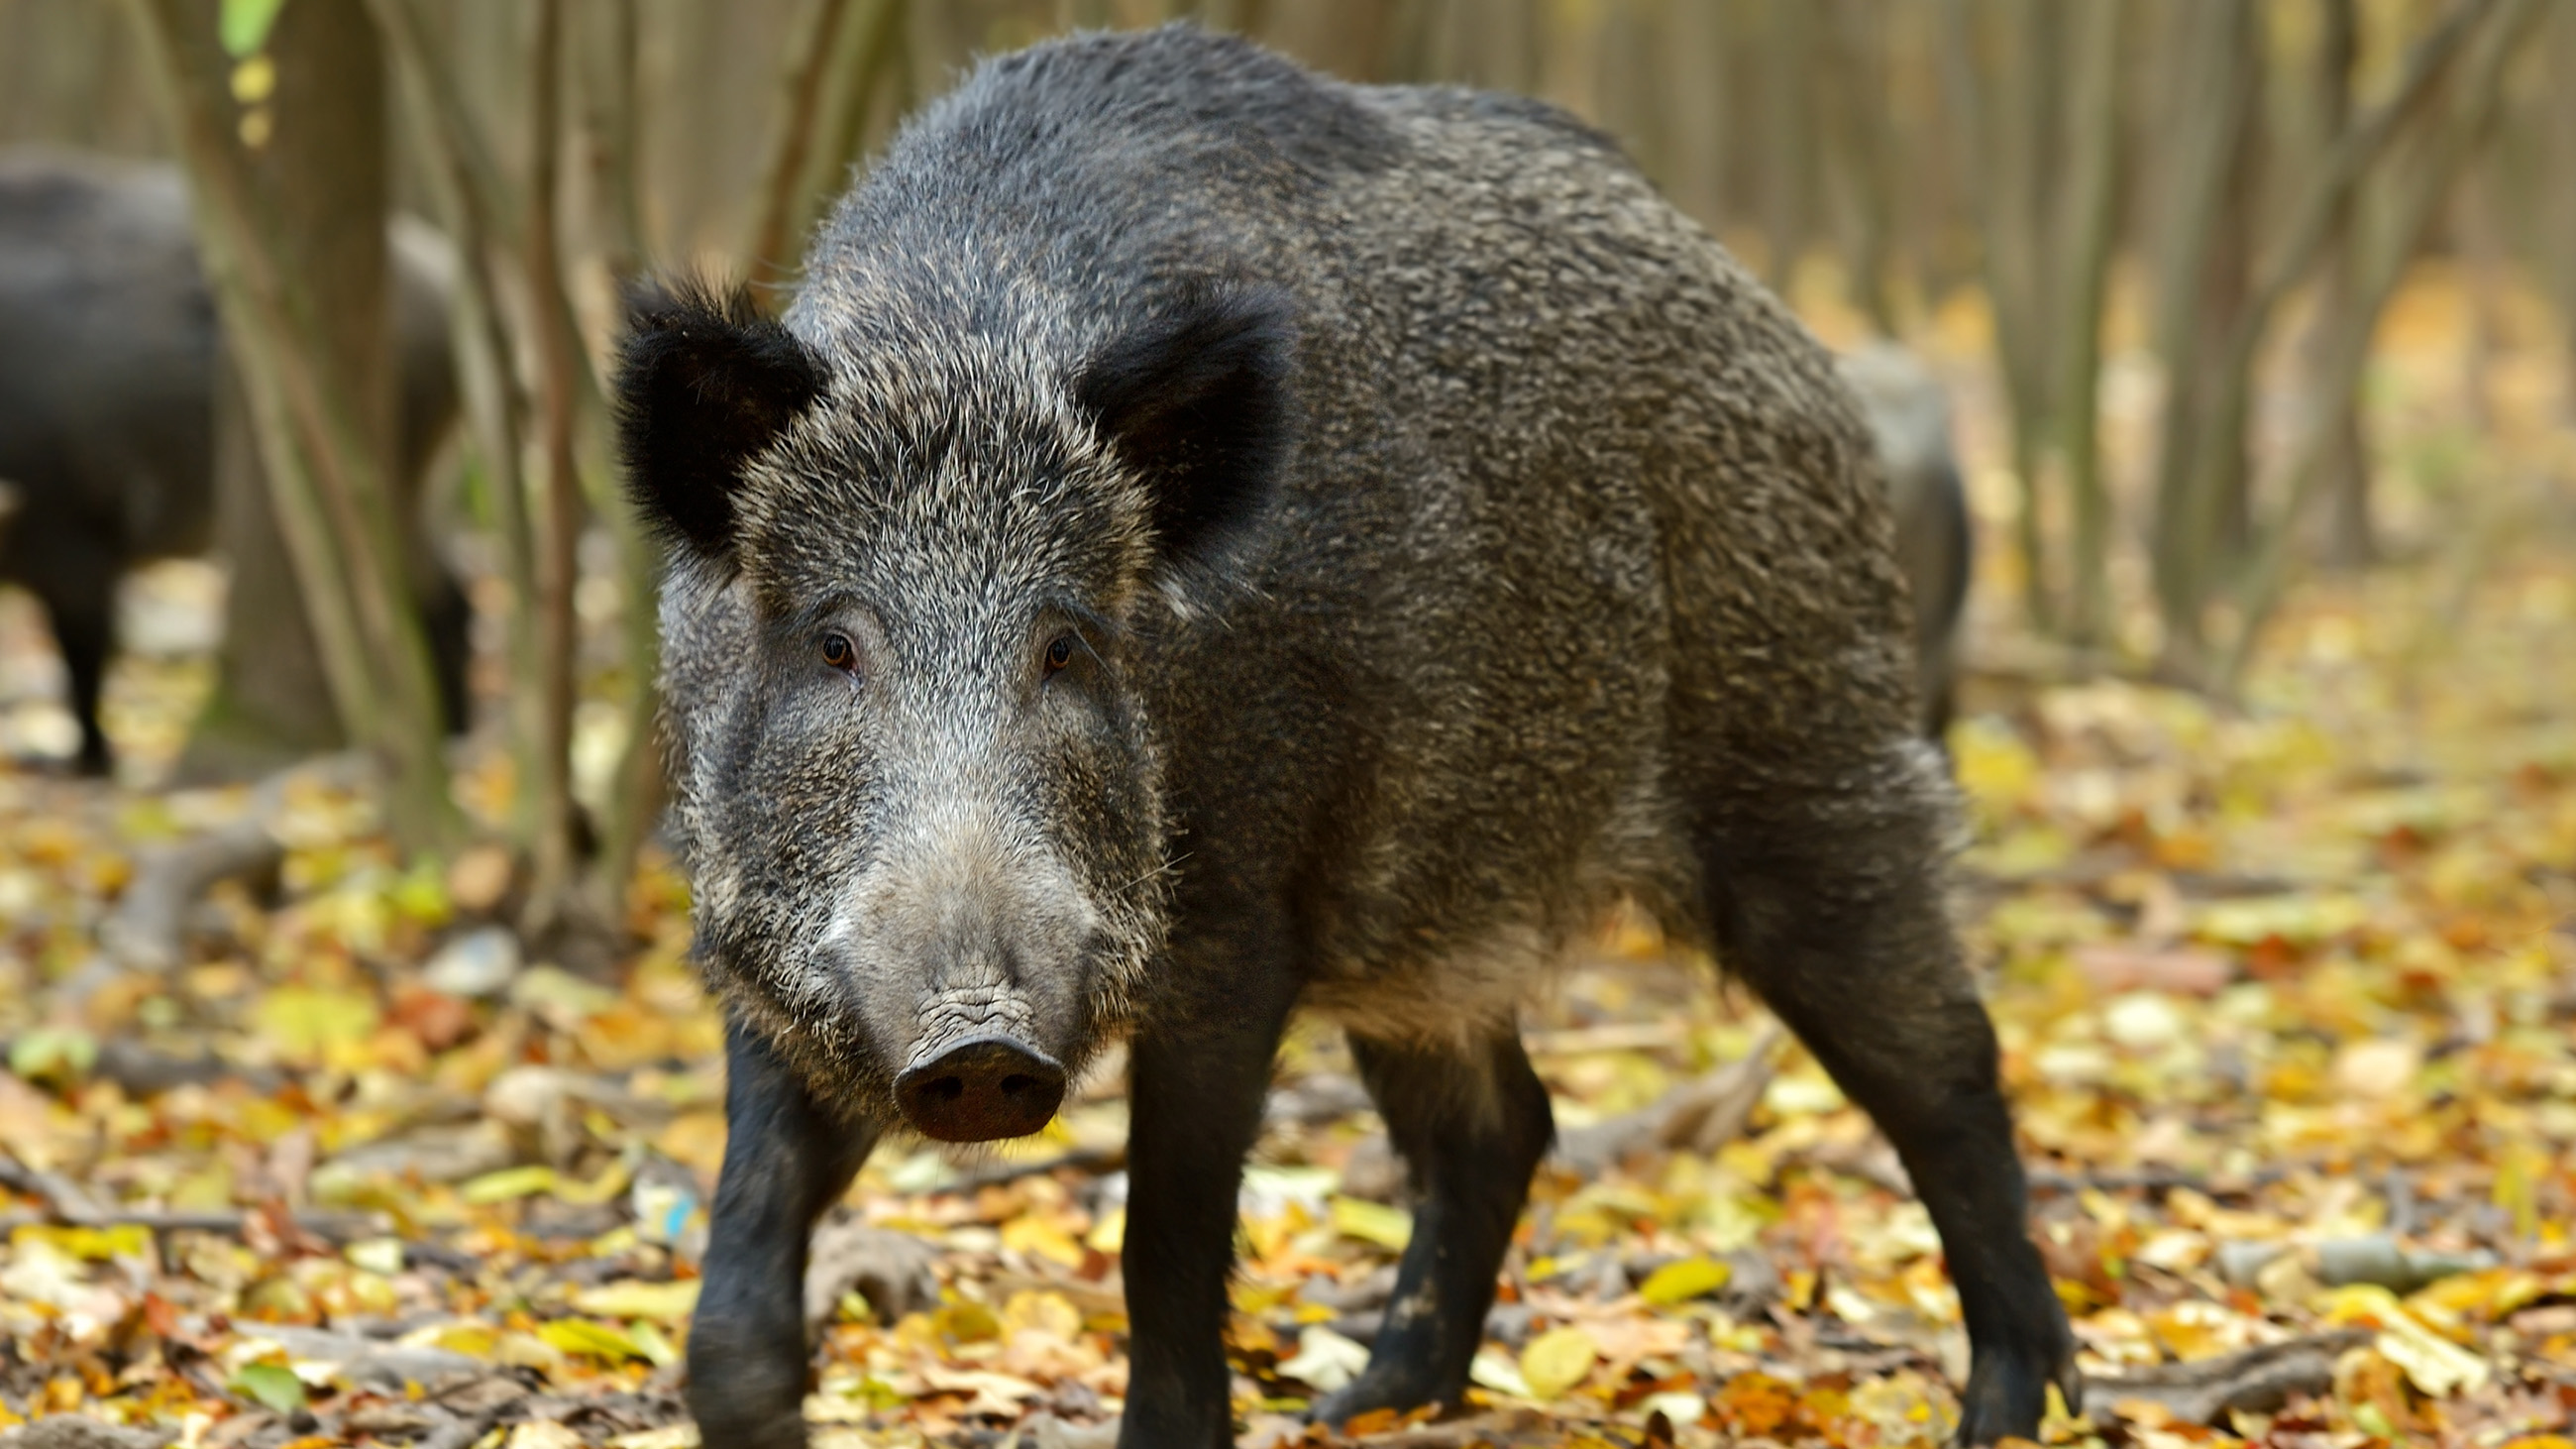 Feral pigs wreak havoc across the U.S. To stop them, officials in Missouri are employing a counter-intuitive strategy.